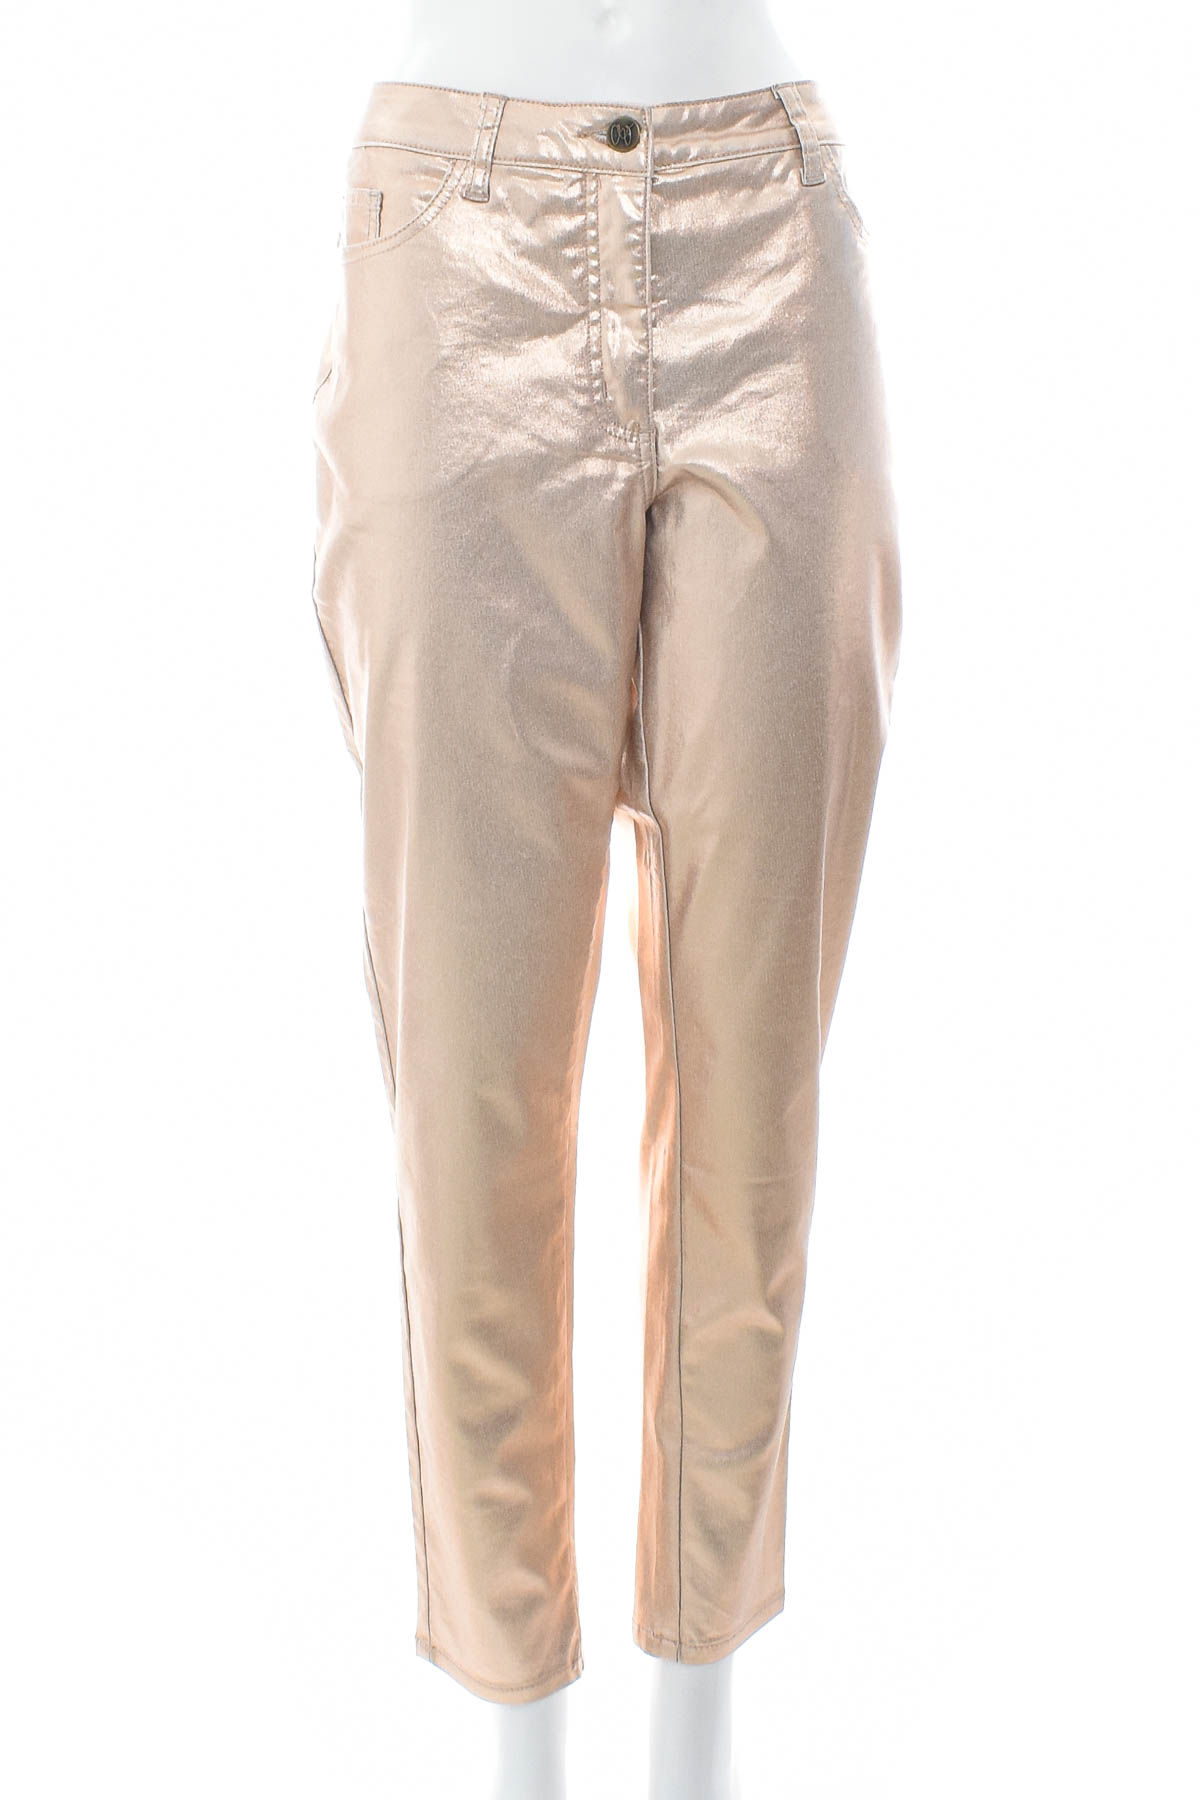 Women's trousers - Amy Vermont - 0